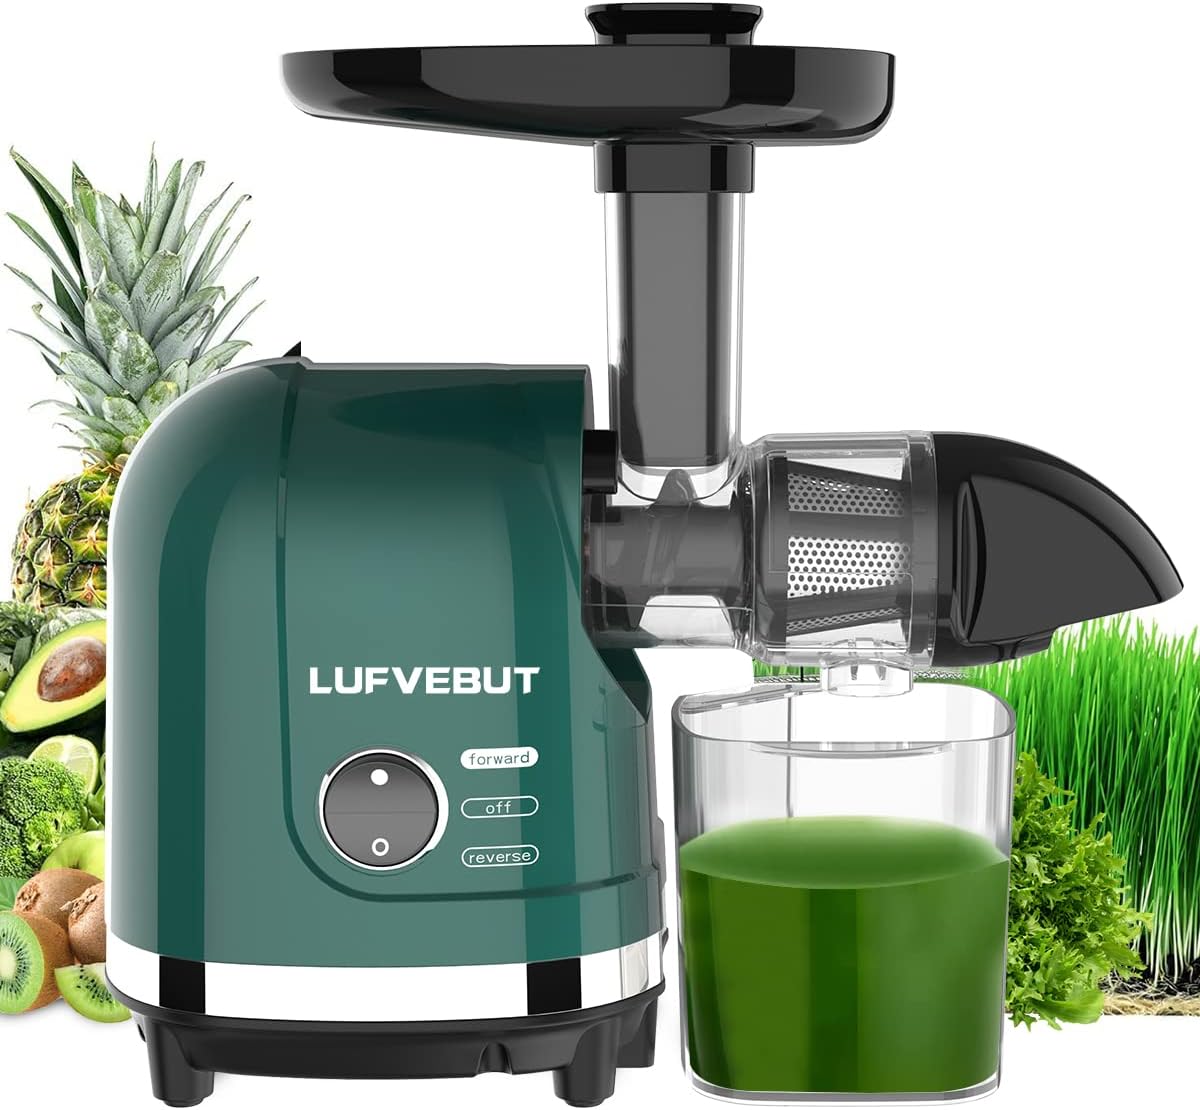 Best Juicer To Make Nutritious Drinks at Home